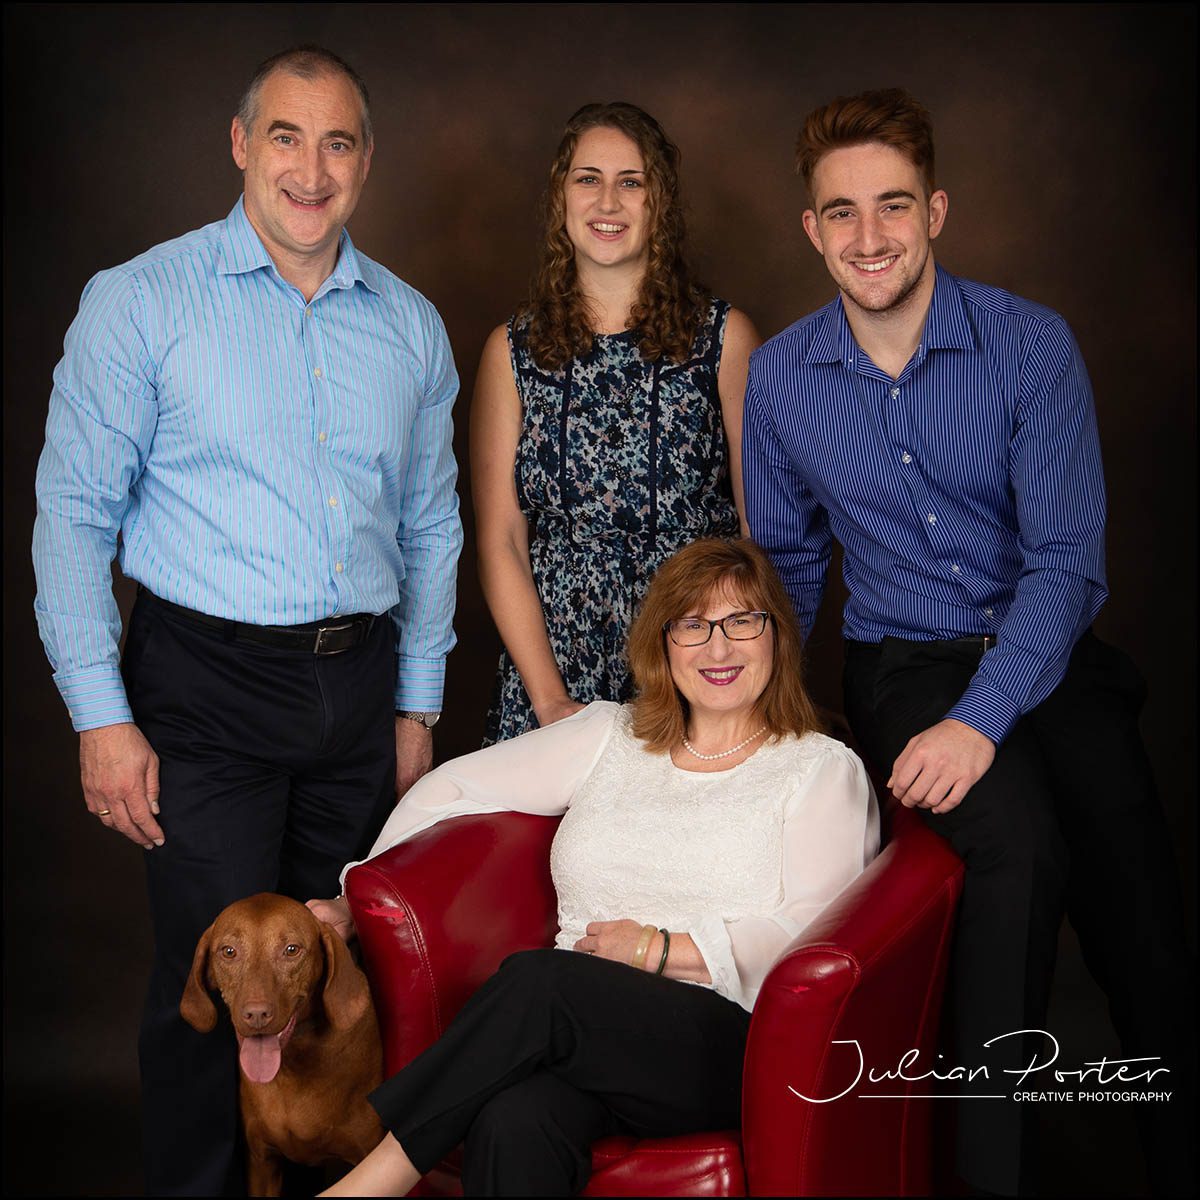 Family sitting on a red chair with dog